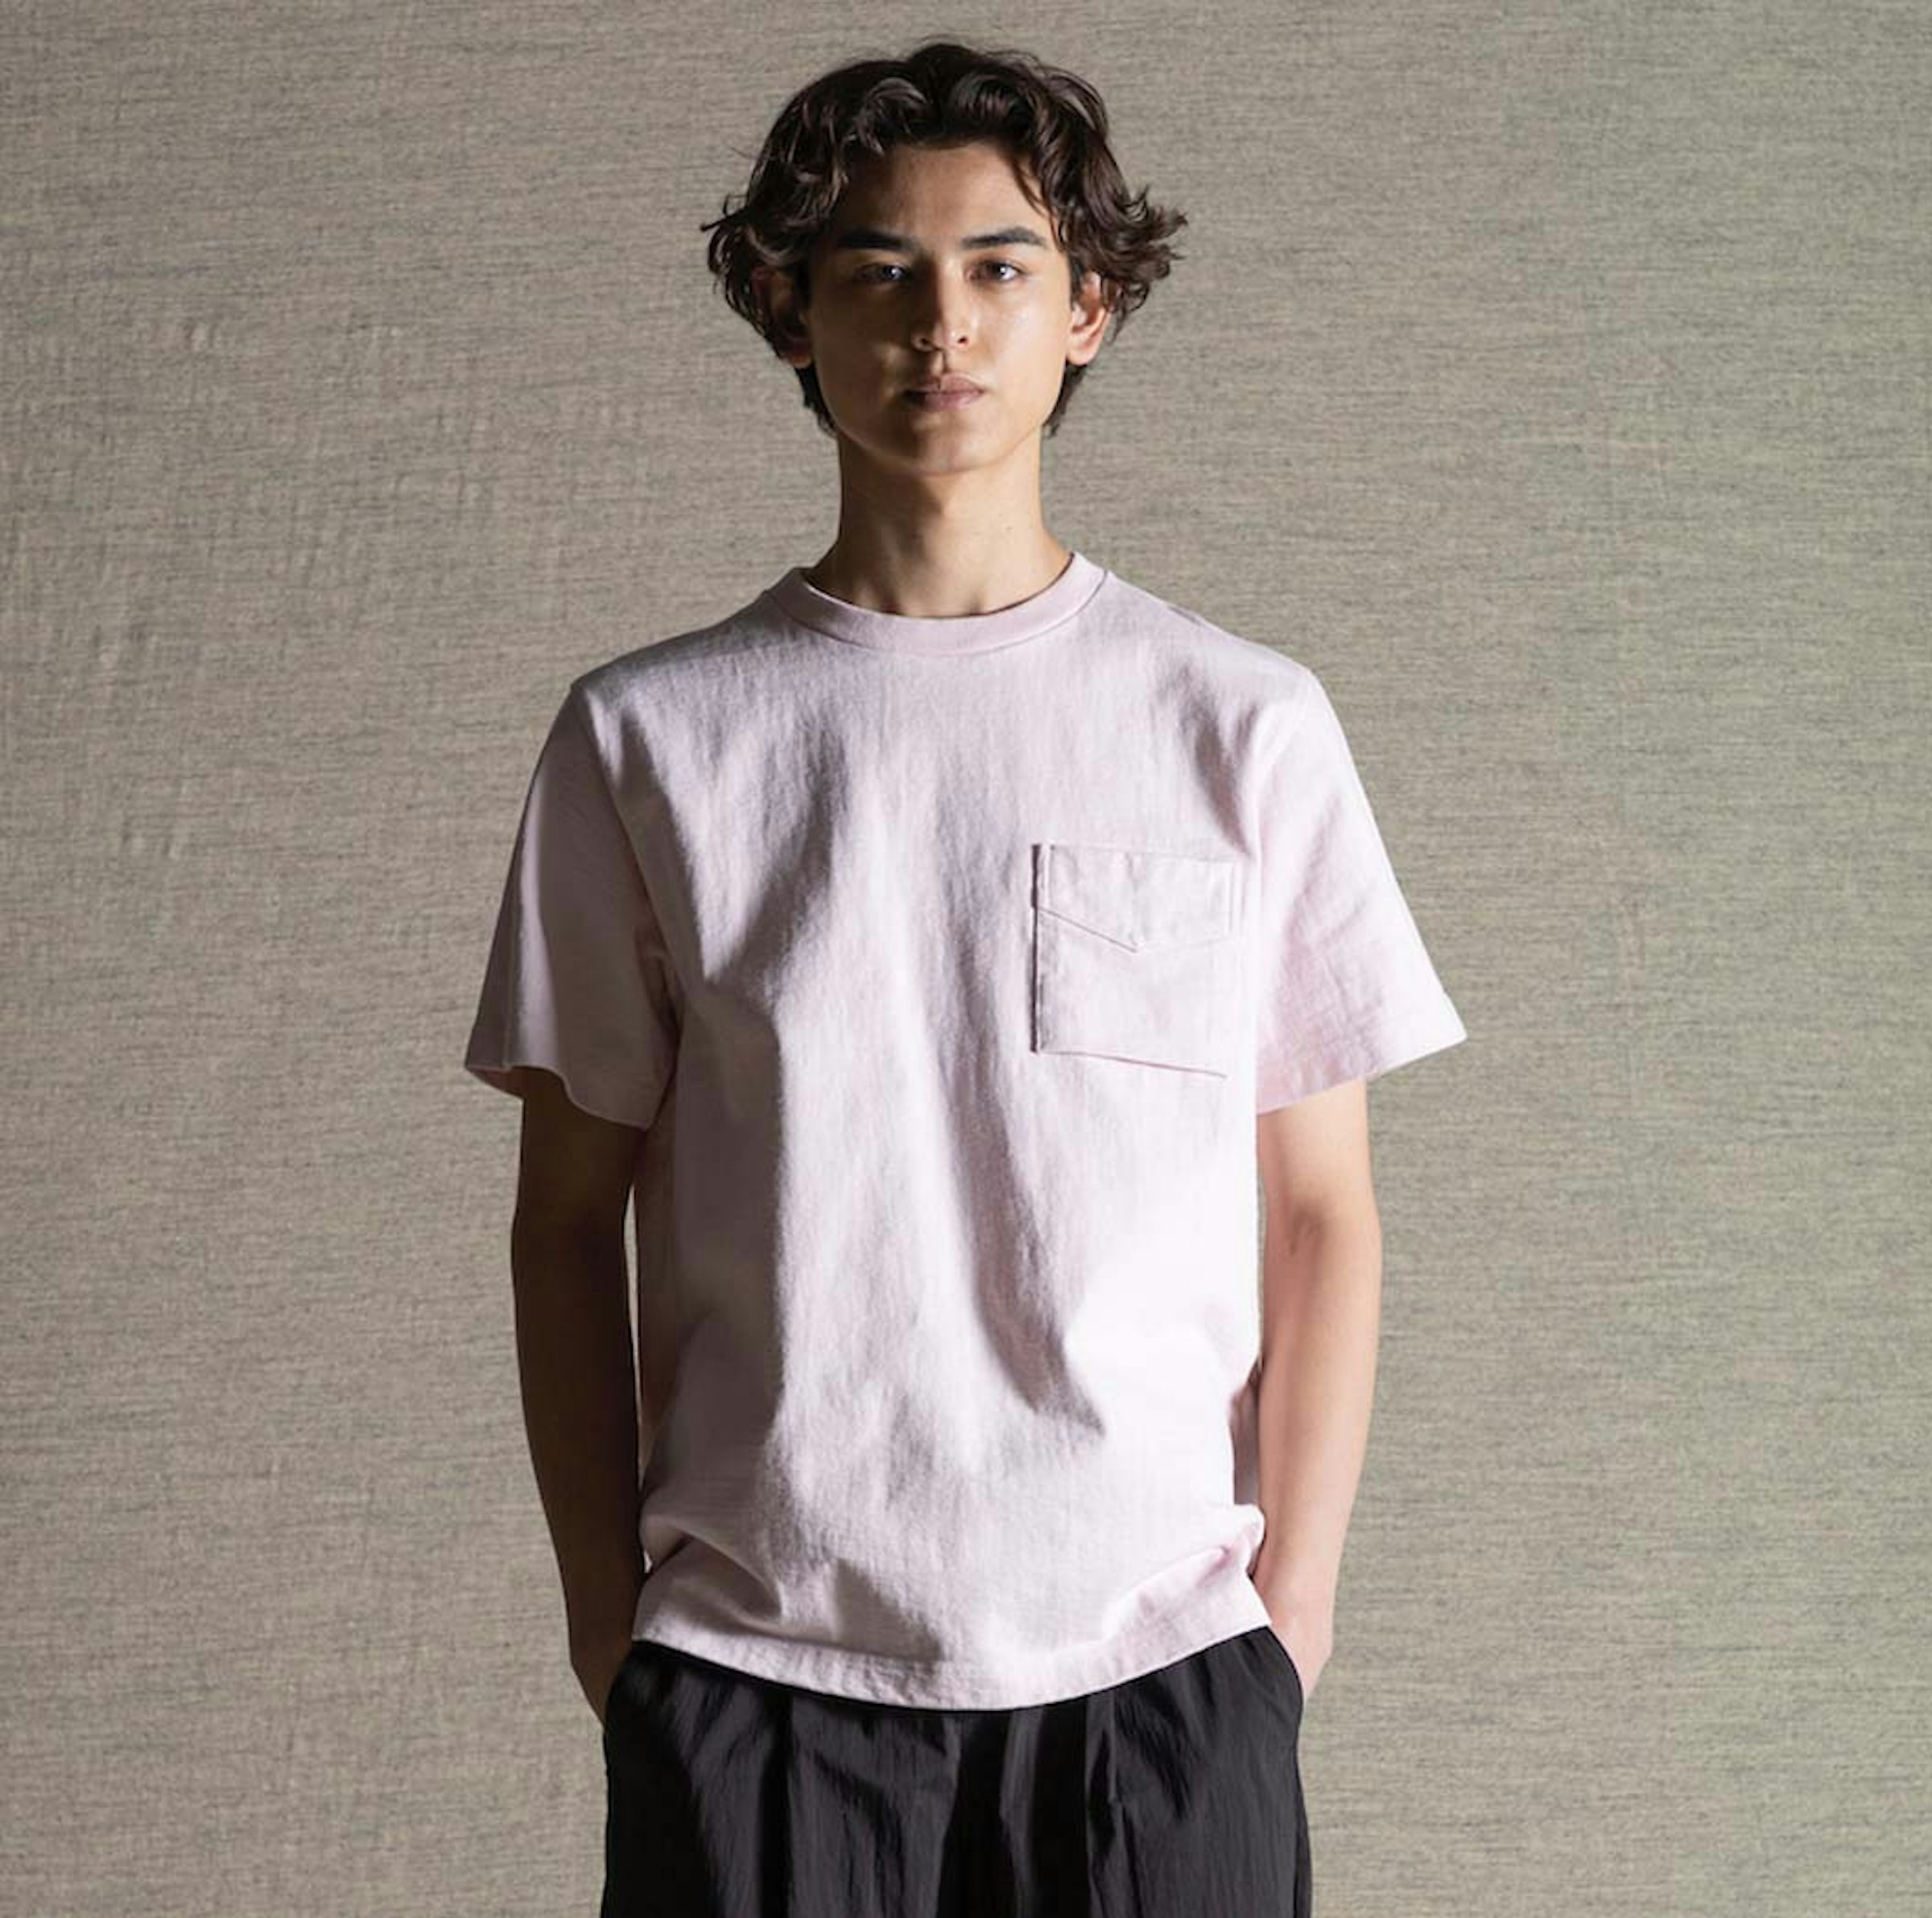 Dotsume Pocket T-Shirt, 12,100 yen (tax included) Scheduled for release around March